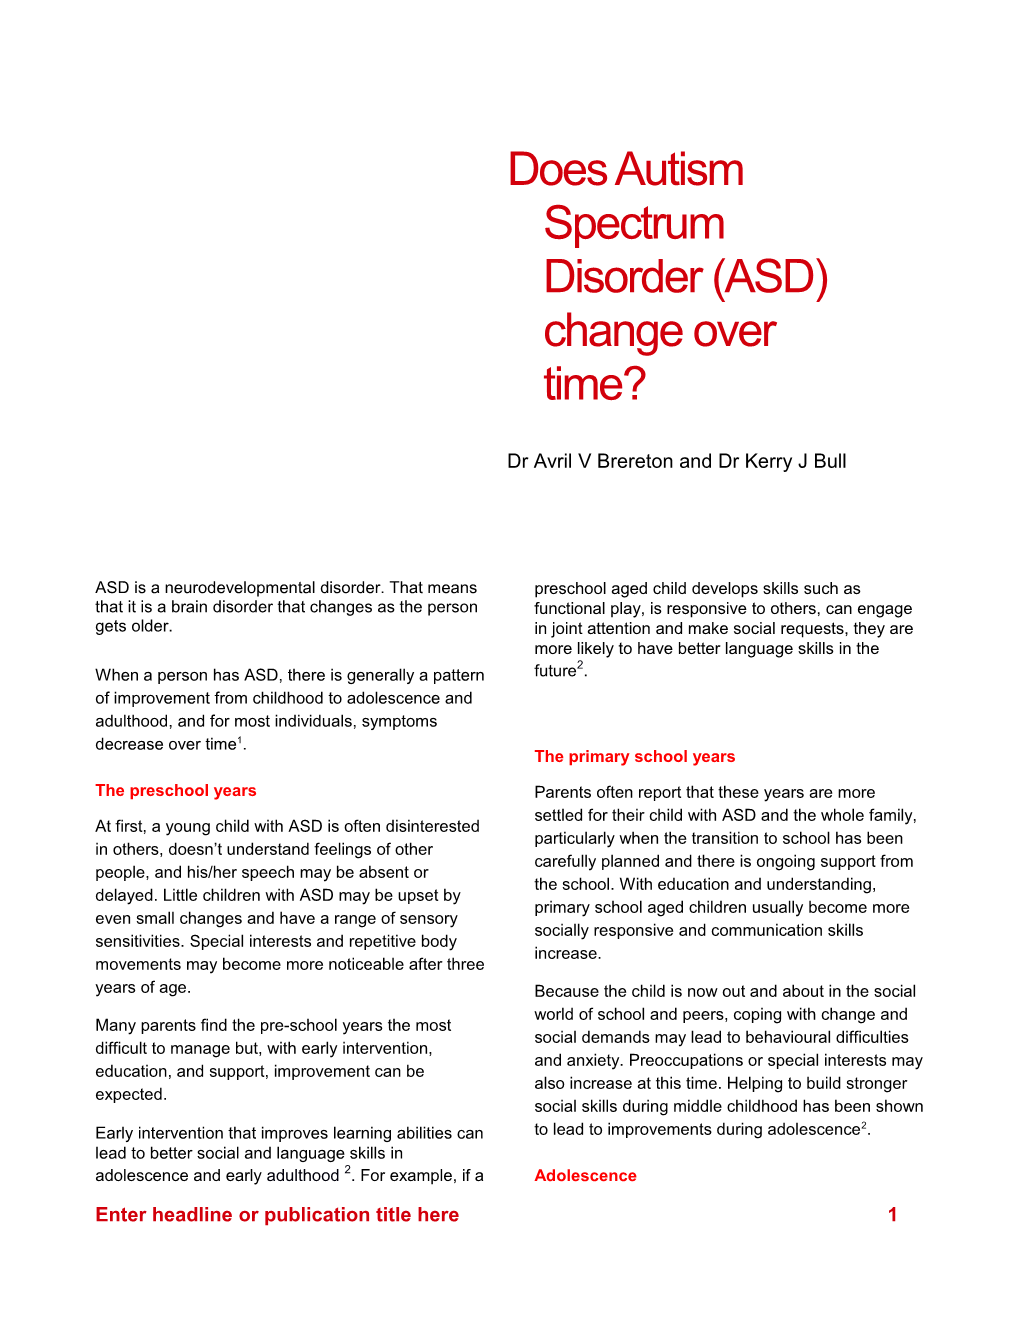 Does Autism Spectrum Disorder (ASD) Change Over Time?